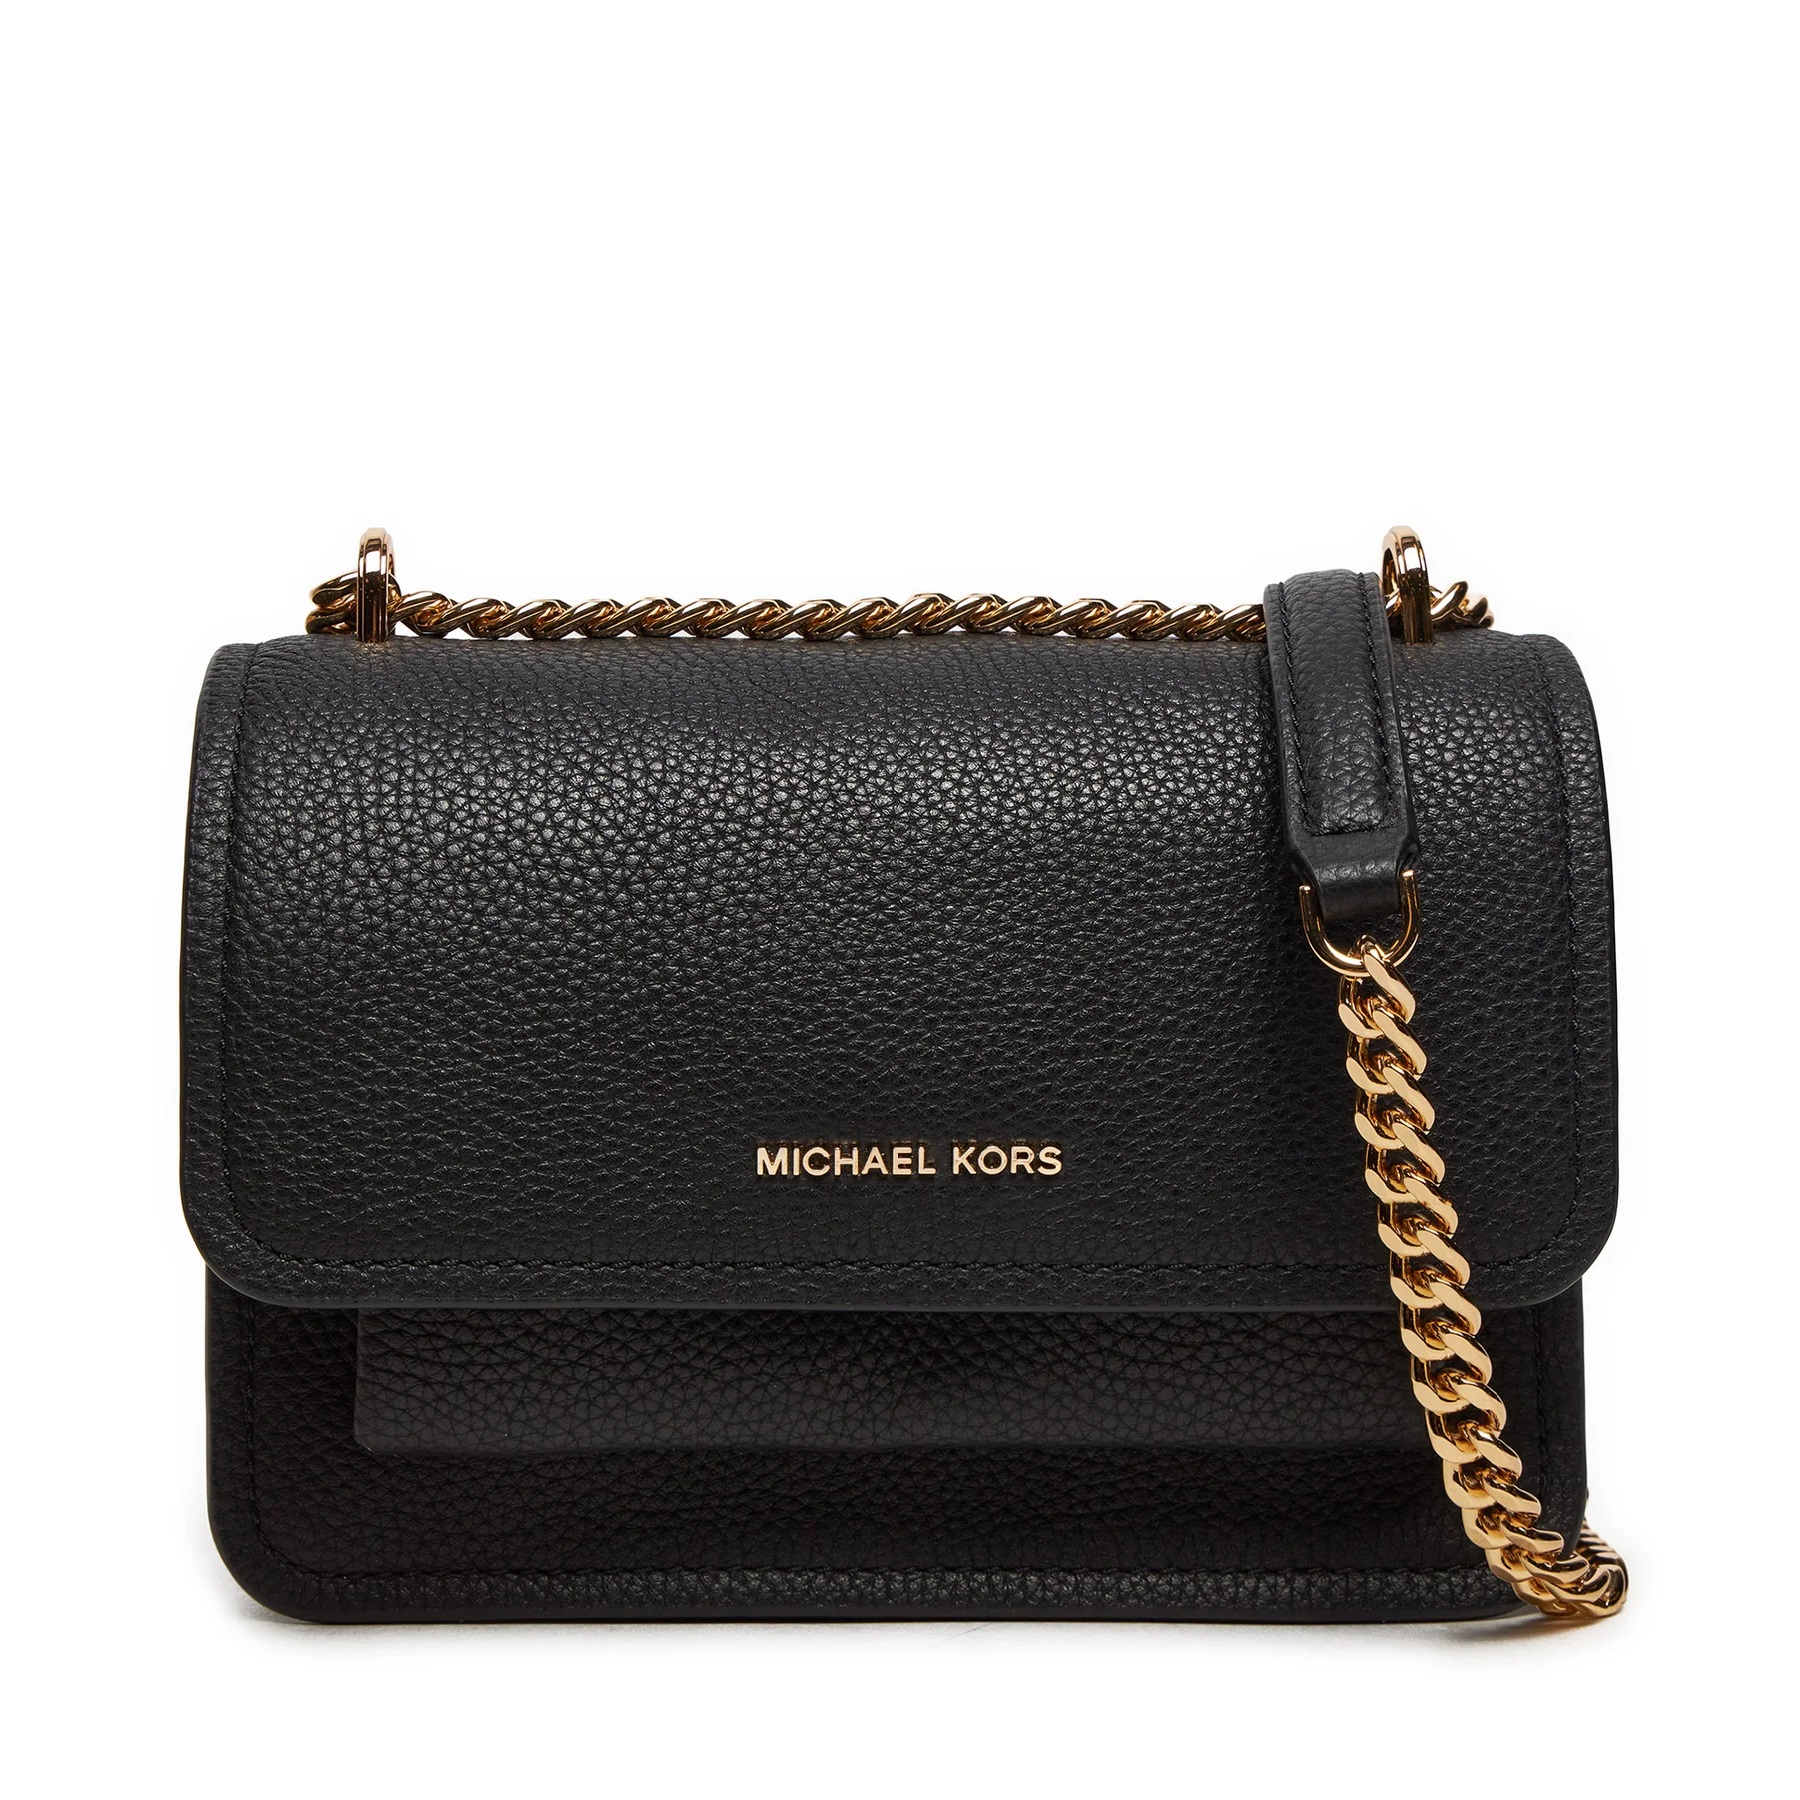 MICHAEL KORS CLAIRE SMALL PEBBLED LEATHER SHOULDER ΤΣΑΝΤΑ